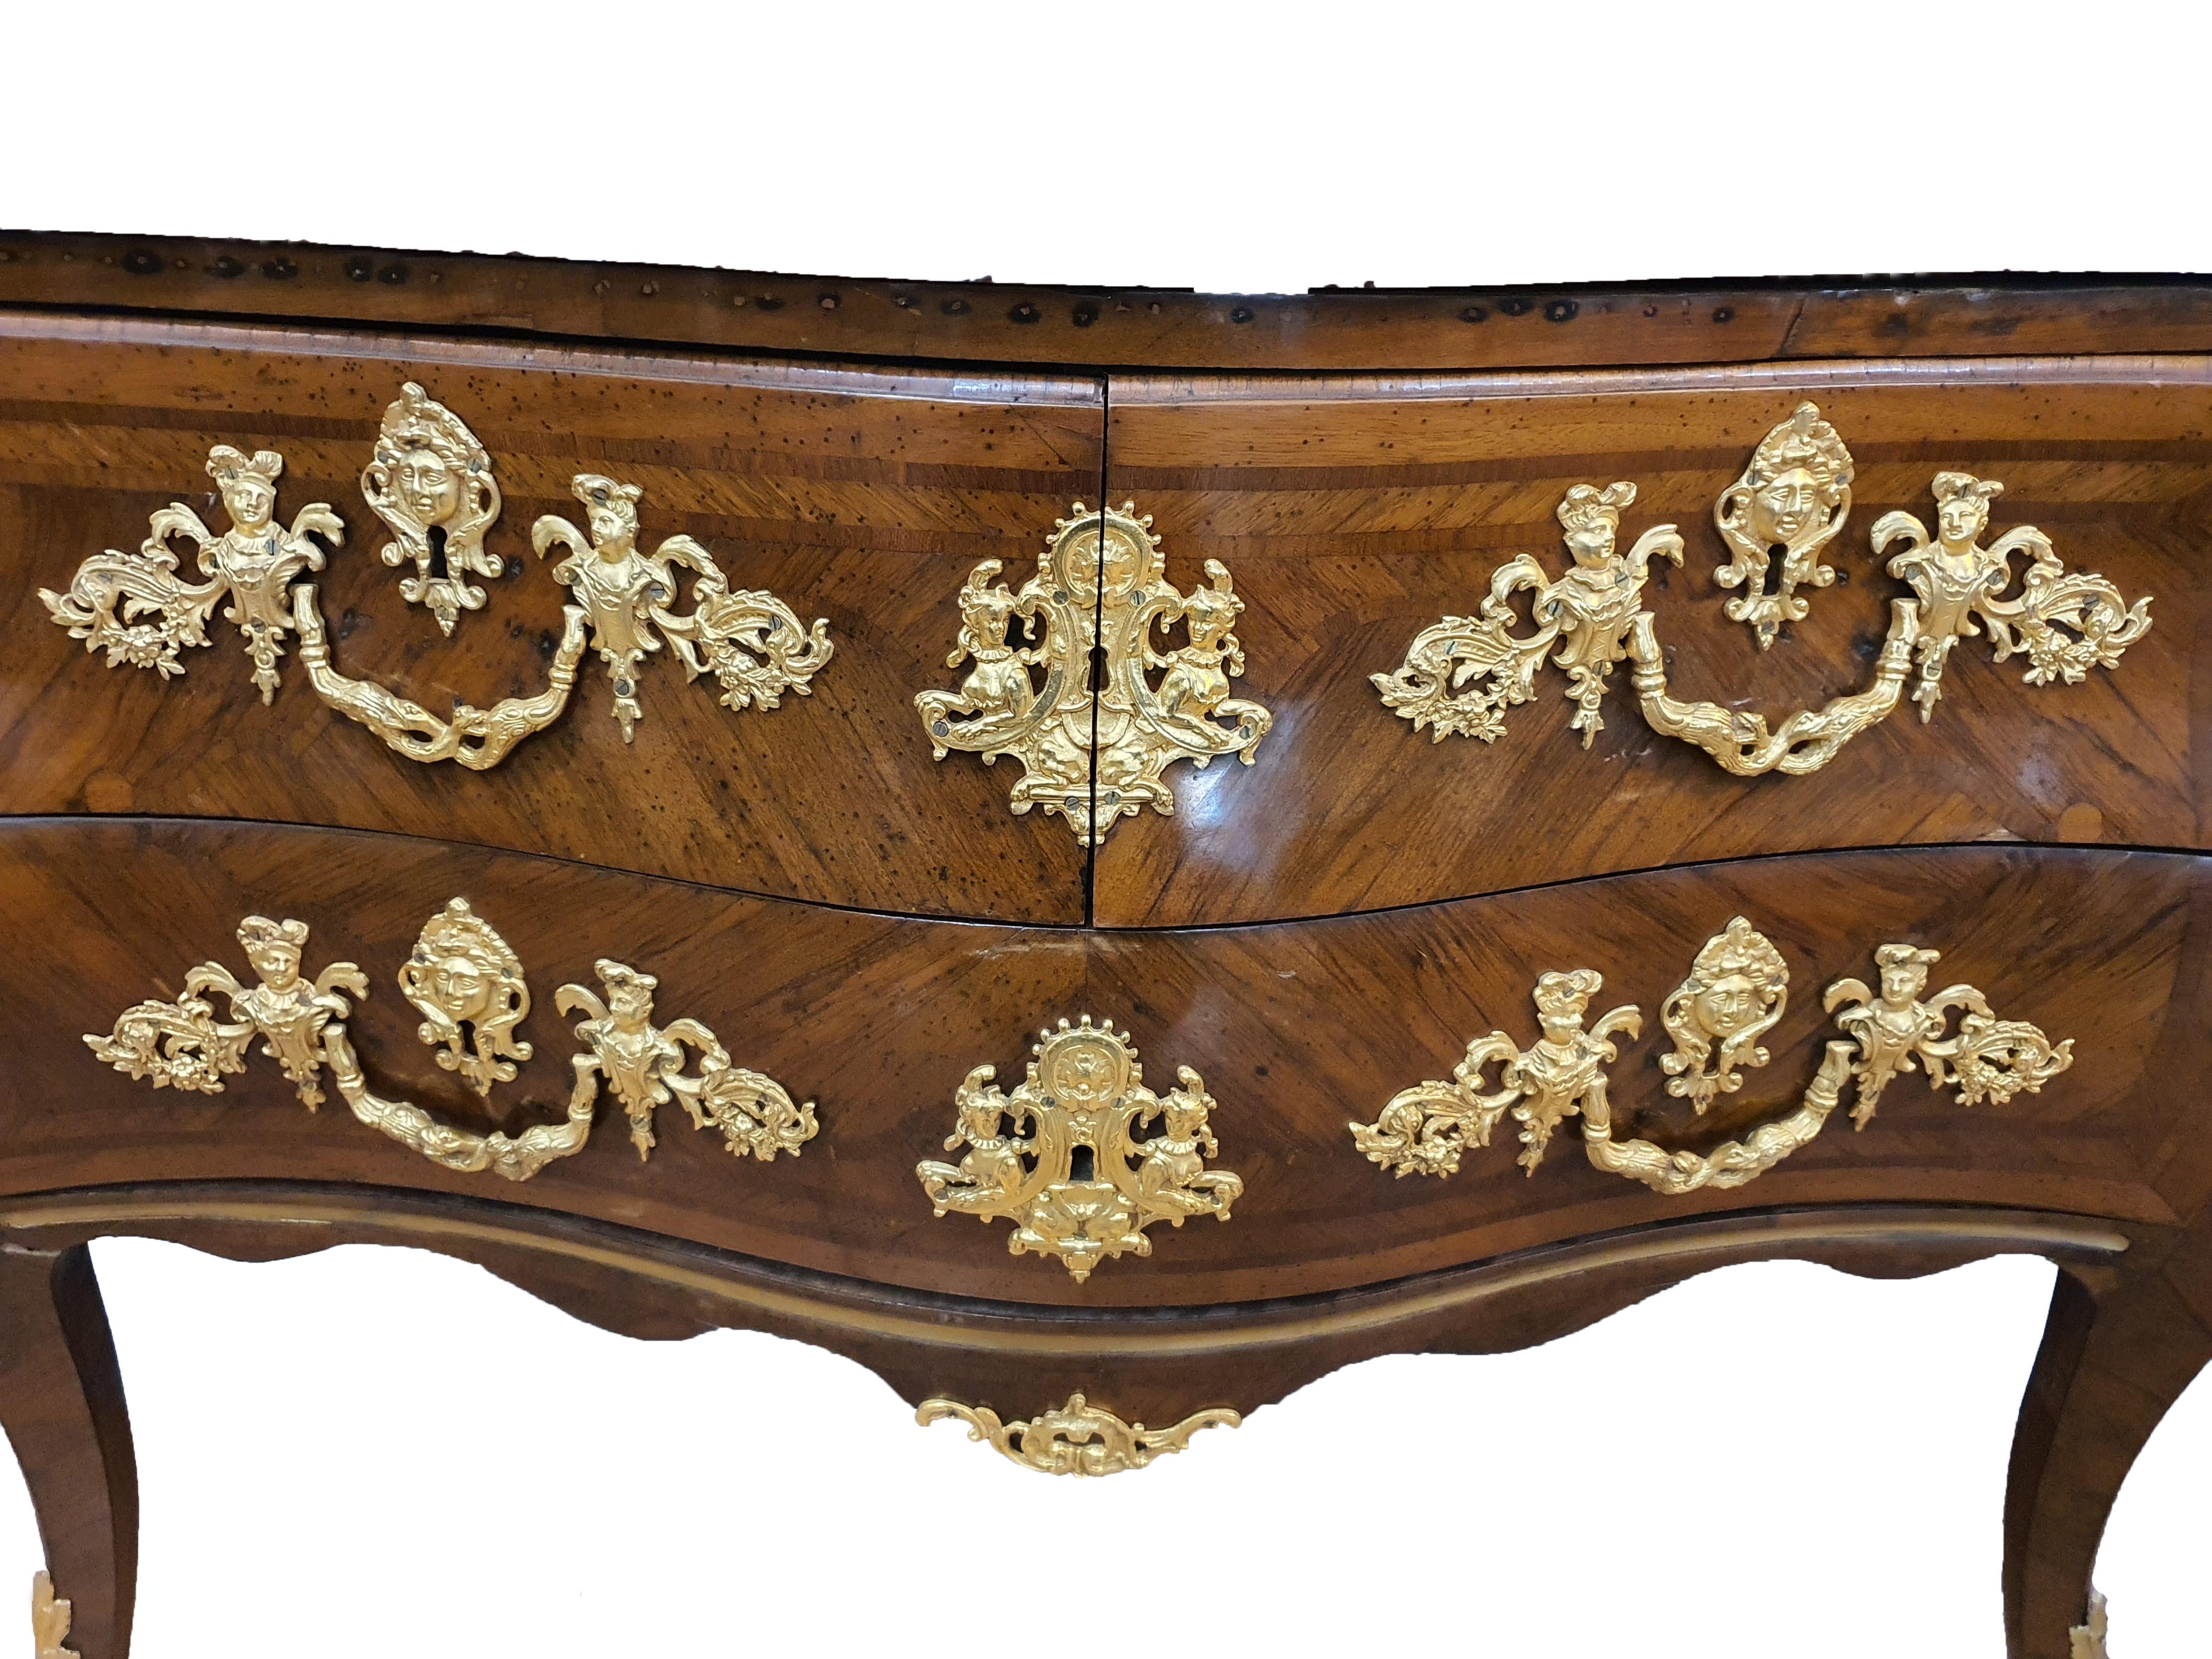 Ancient and important commode composed of a large drawer and two small
drawers side by side, entirely veneered in walnut, and rosewood. Handles and
applications in finely chiseled and gilded bronze adorn the dresser making it a work
of art. Upper